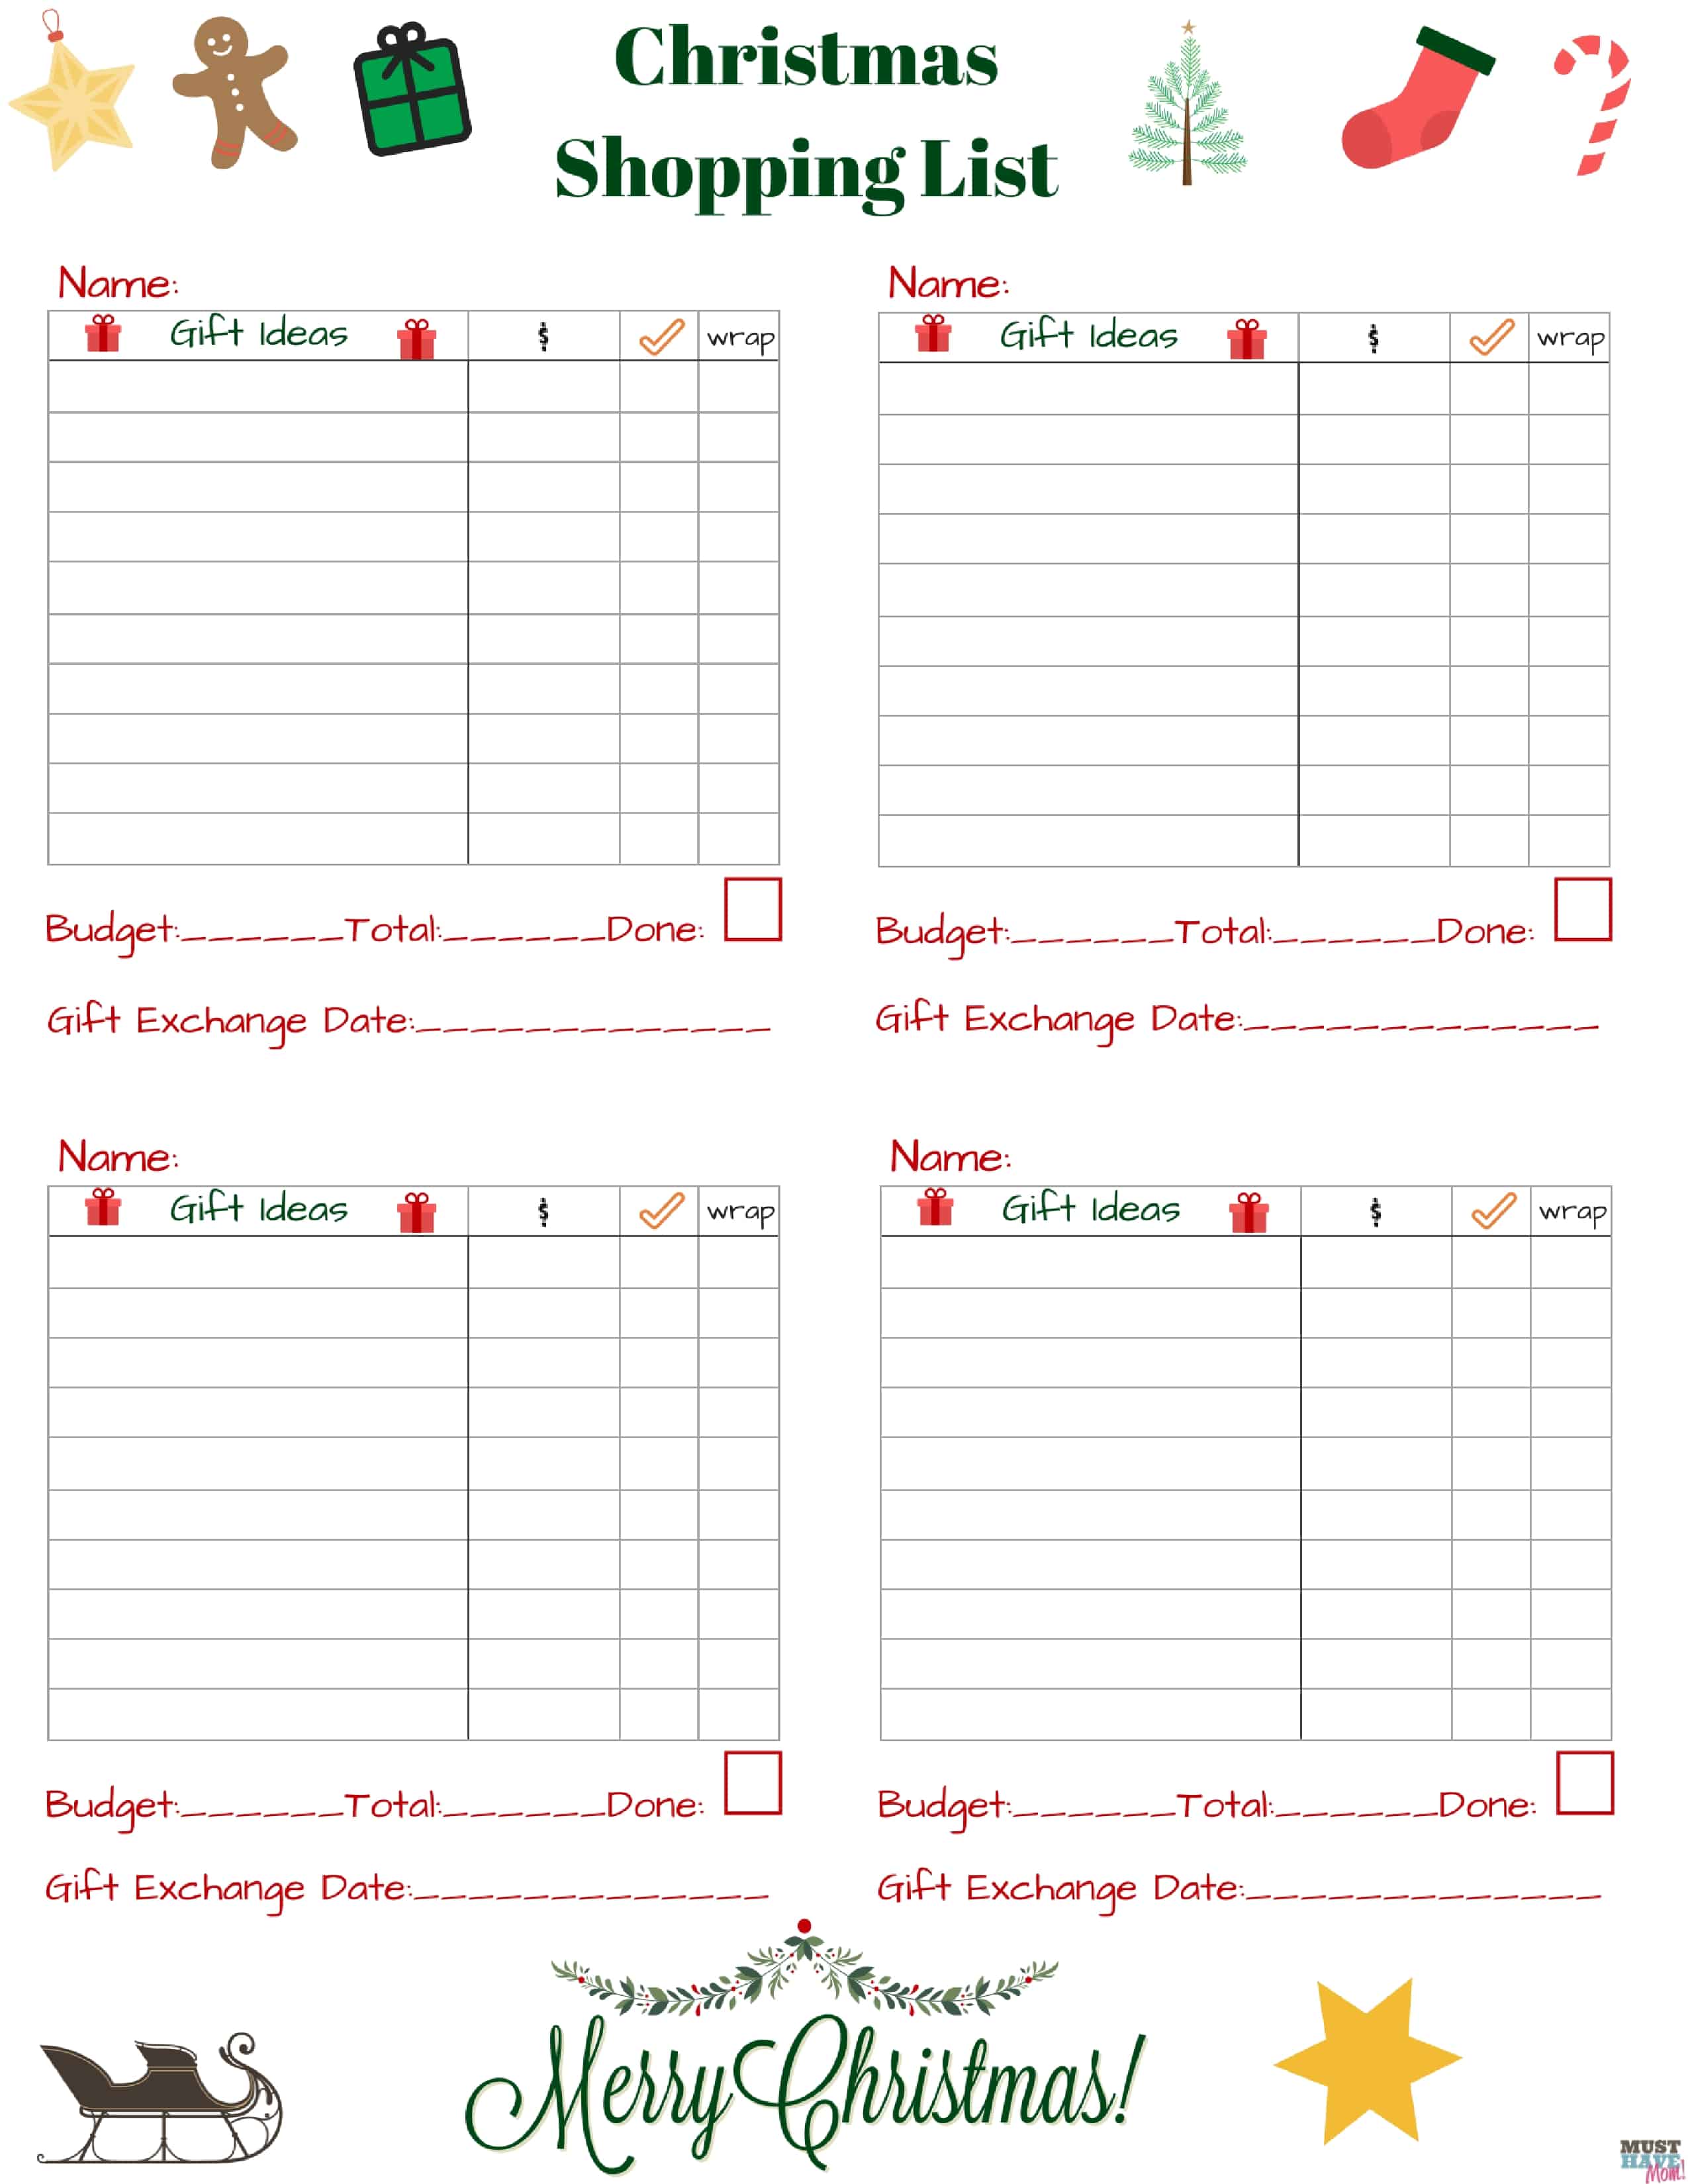 Free printable Christmas list and stocking stuffer checklist. Organize your Christmas shopping with this Christmas shopping list printable that lets you list each person, ideas, bought or not and wrapped or not. It also helps keep track of Christmas budget!